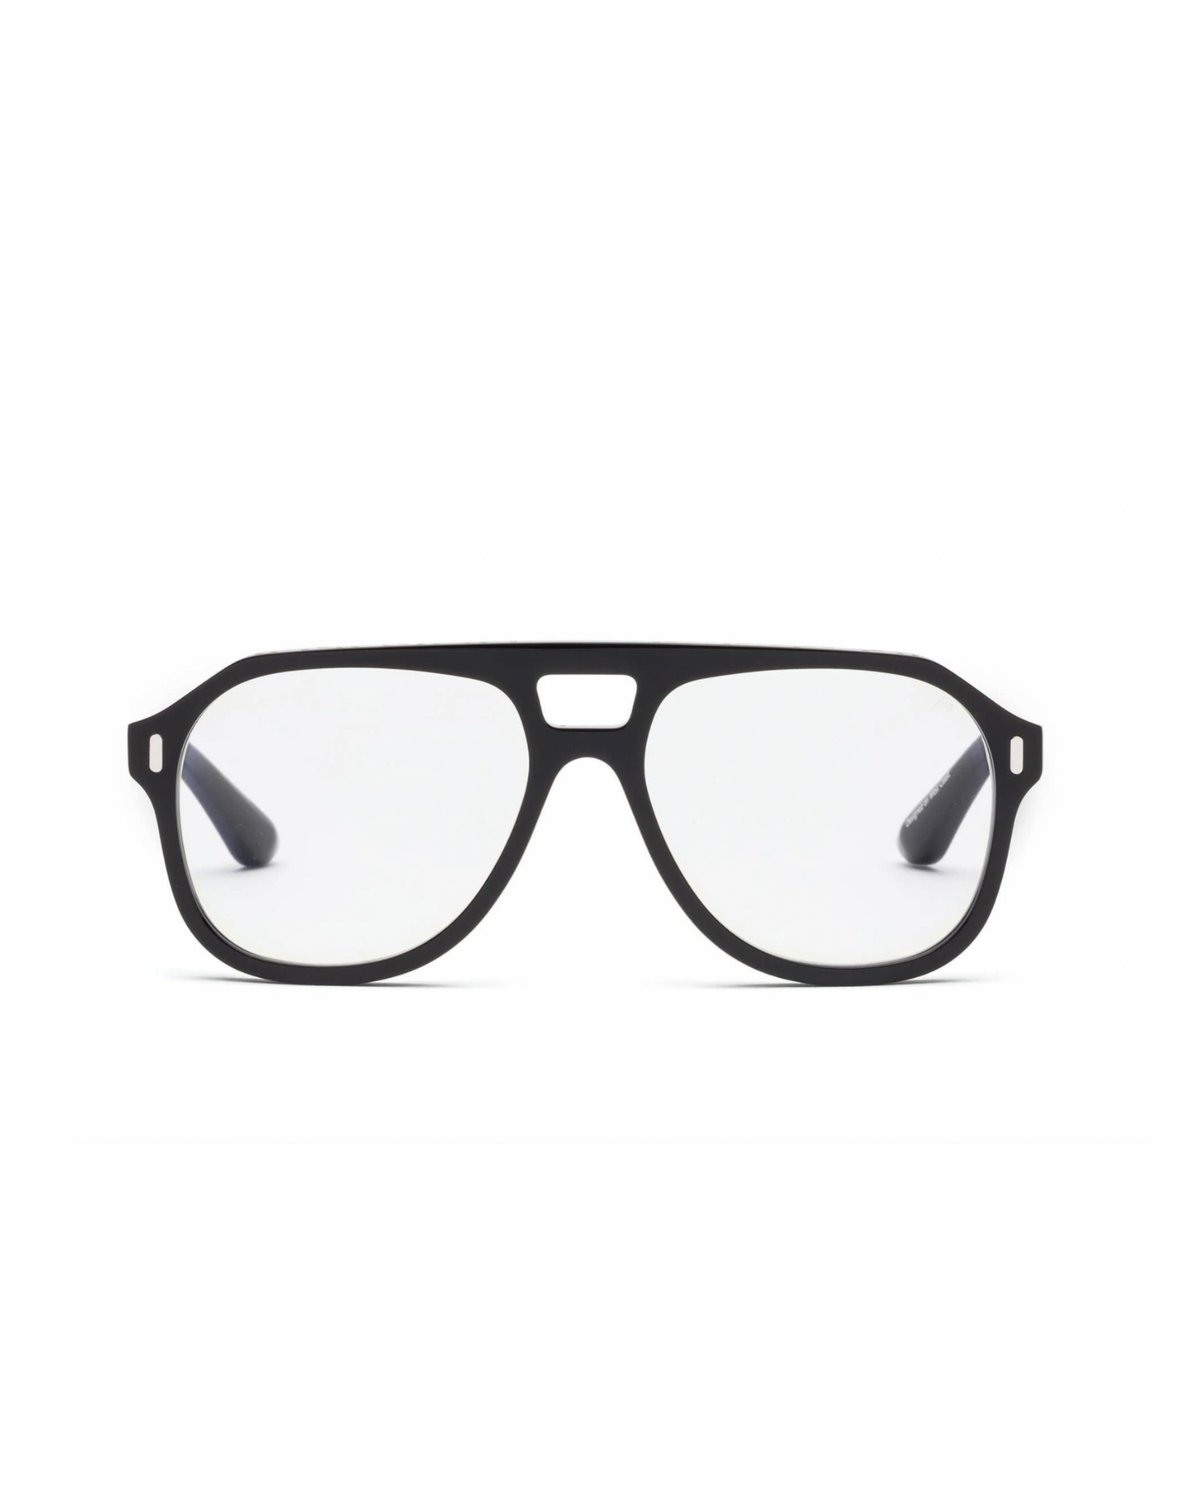 ROOT CAUSE ANALYSIS Reading Glasses - AshleyCole Boutique